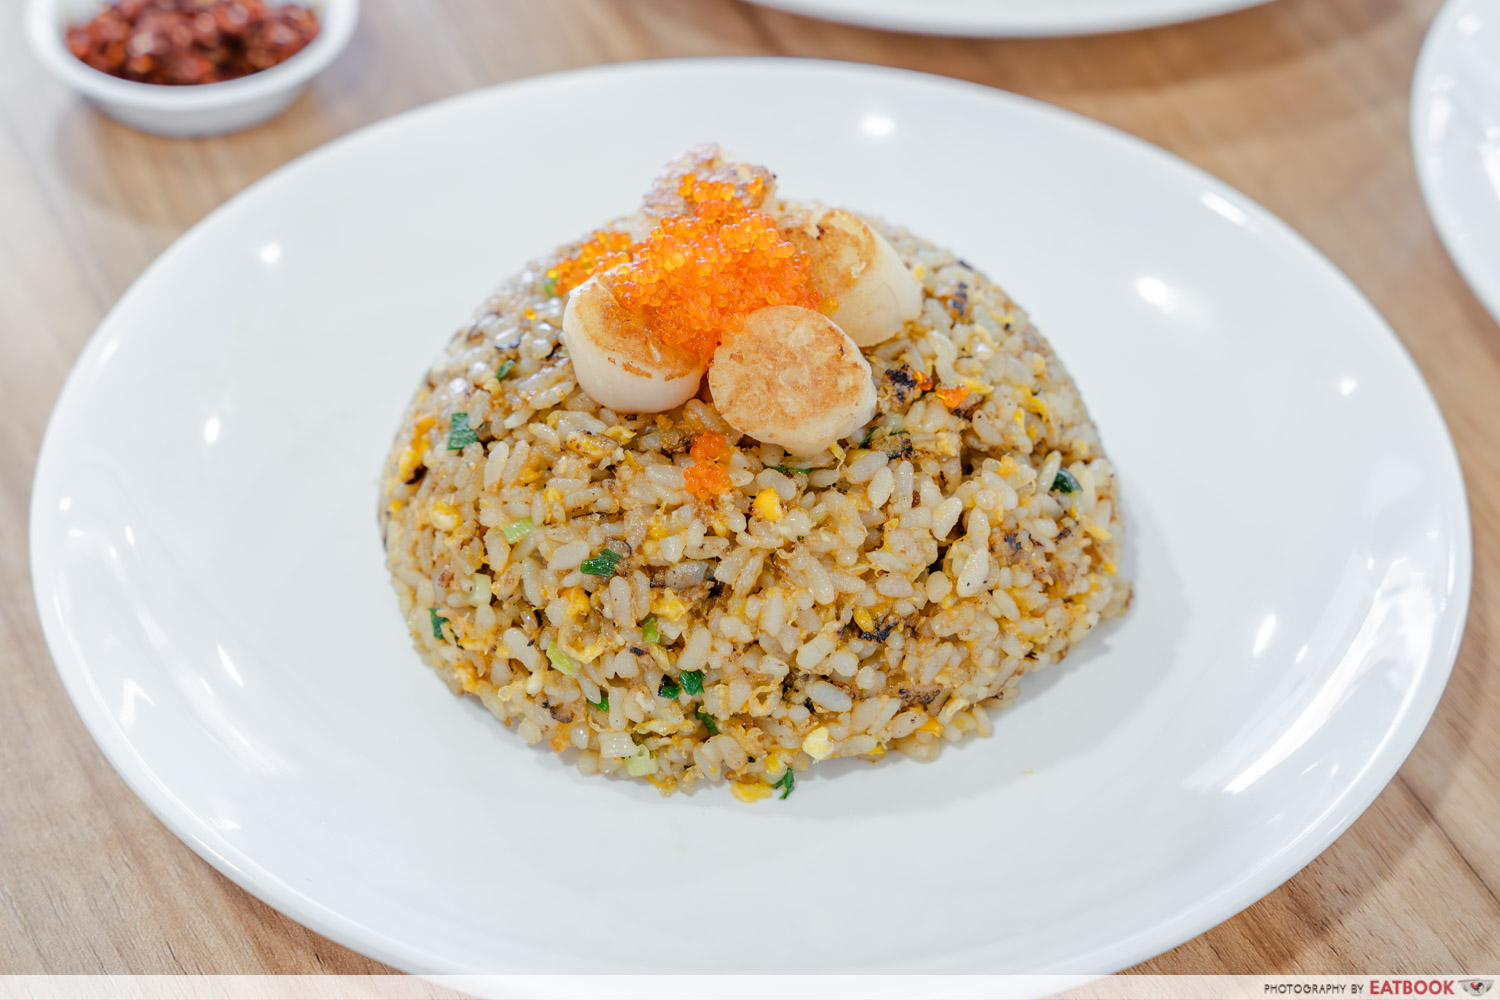 fried rice story - grilled scallops teriyaki egg fried rice intro